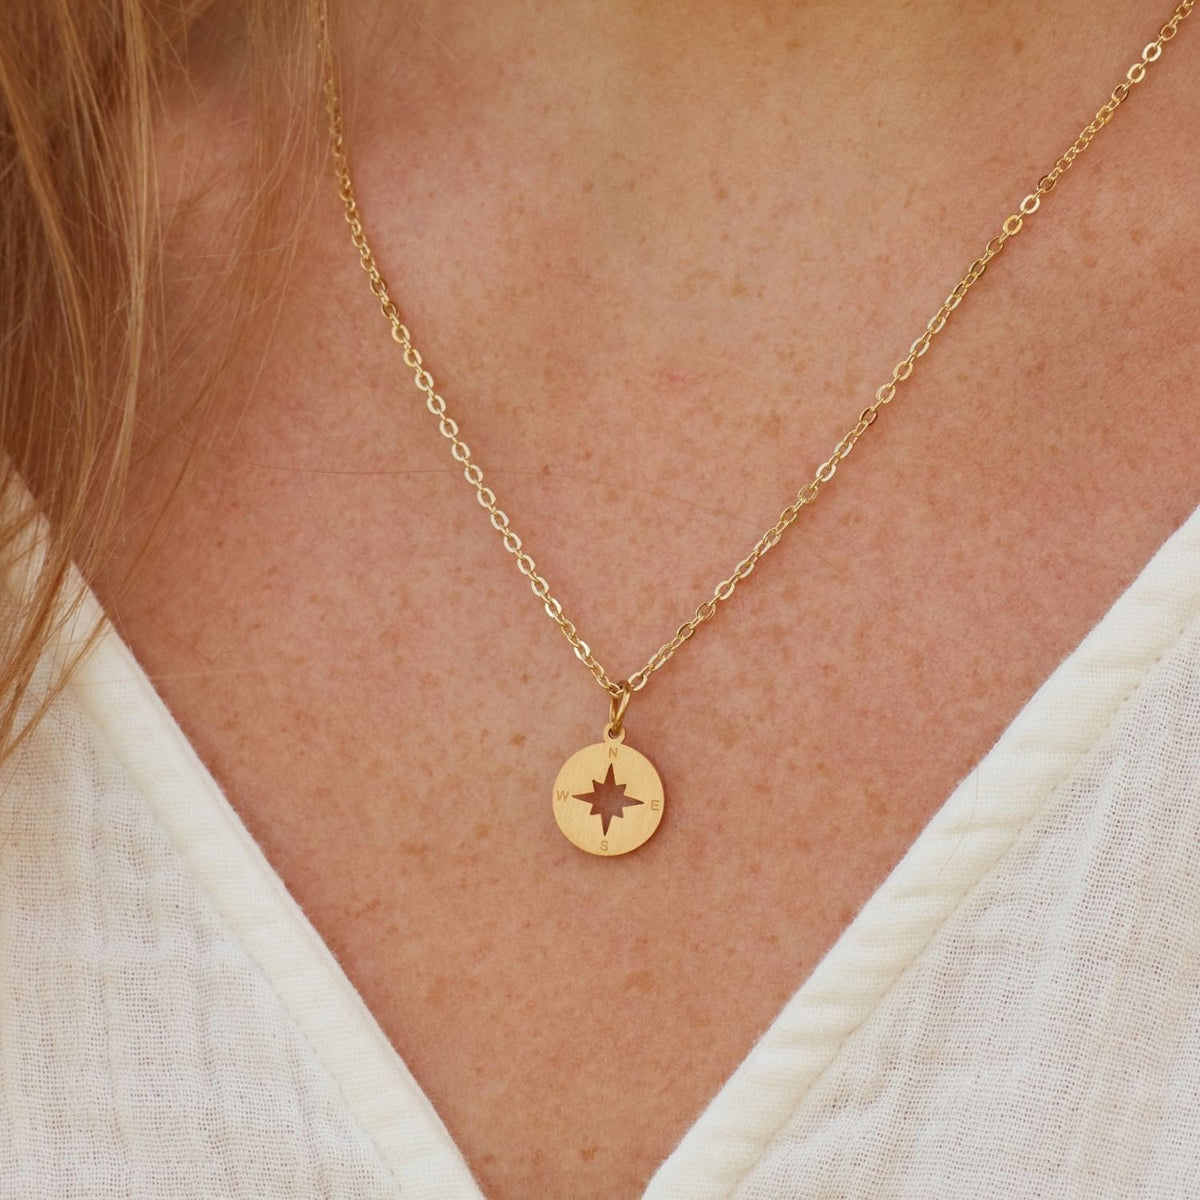 To the Best Mother in Law (From Daughter in Law) | Man of My Dreams | Compass Necklace